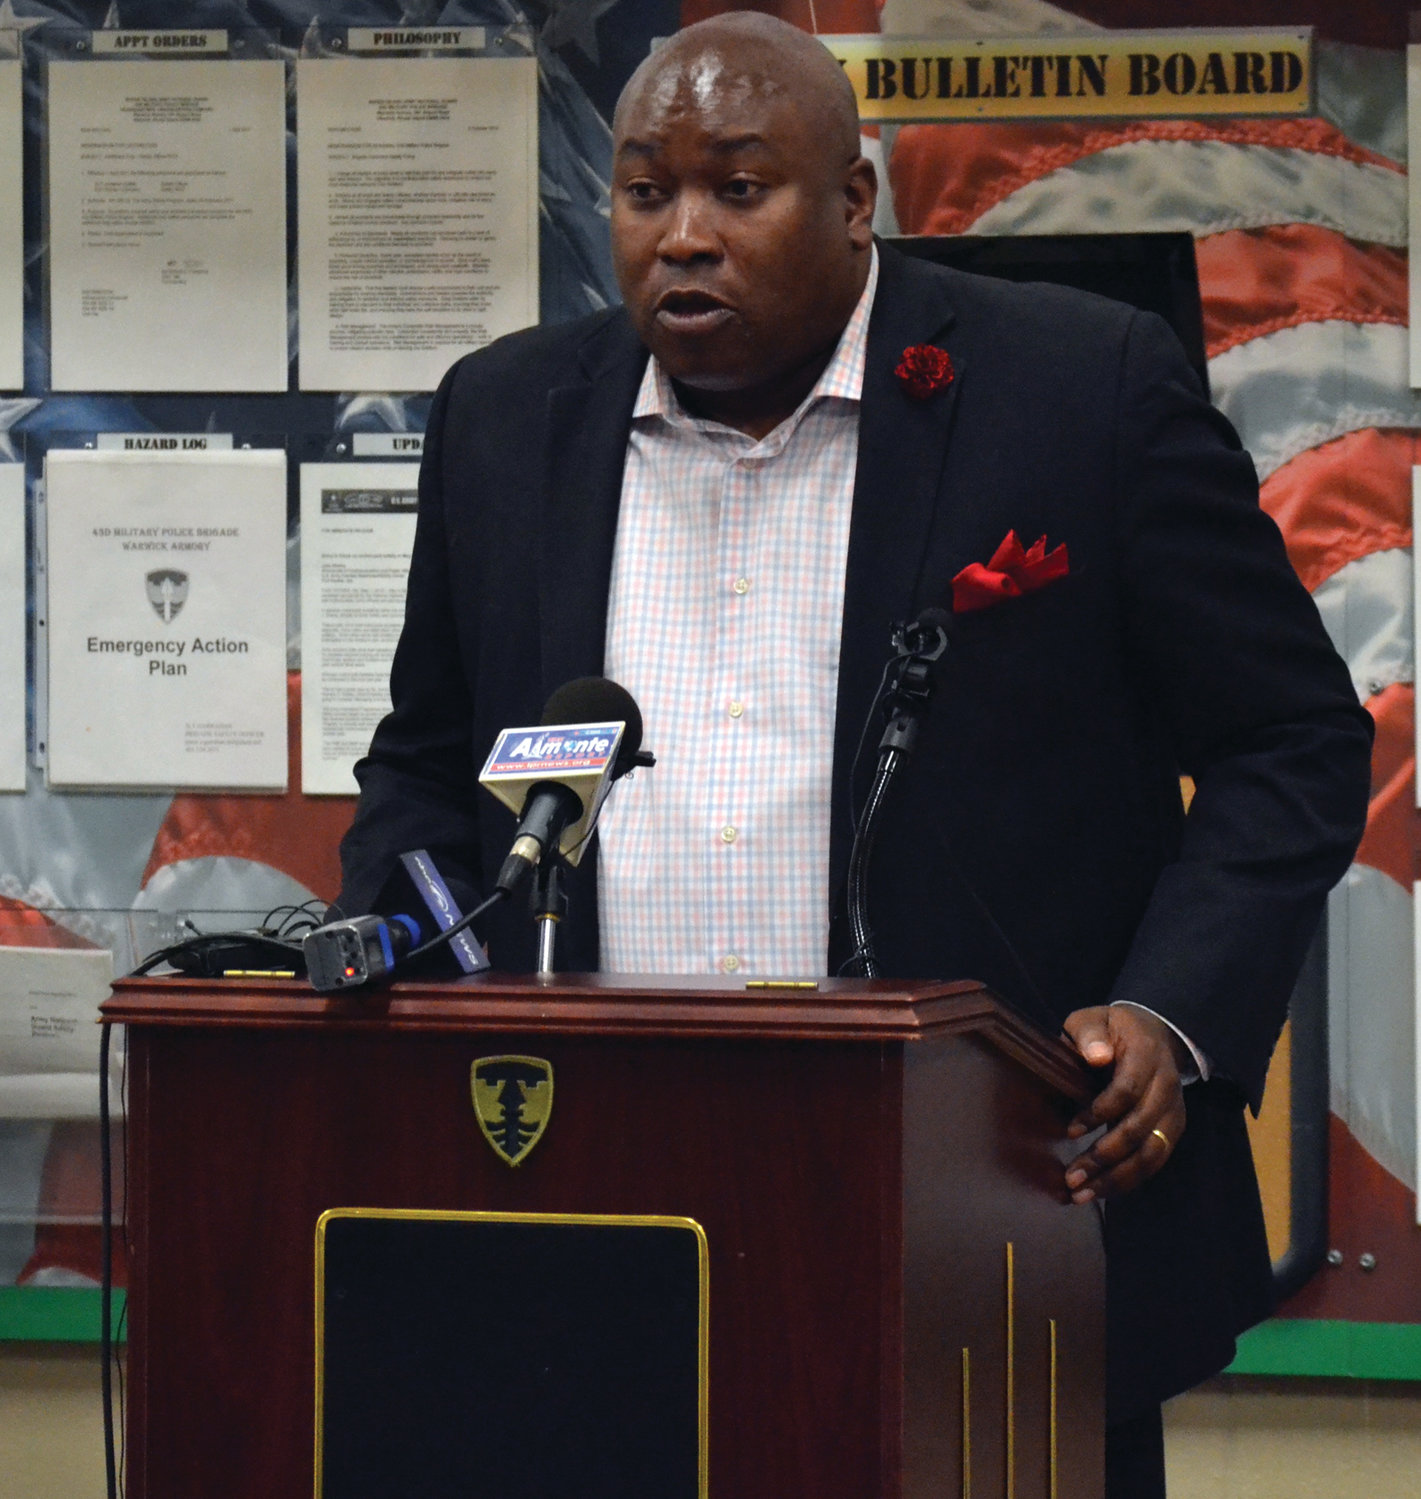 NOTHING BUT LOVE: State Veterans Affairs Director Kasim Yarn offered his support and thanks to those serving the country, noting their “willingness to give all.”